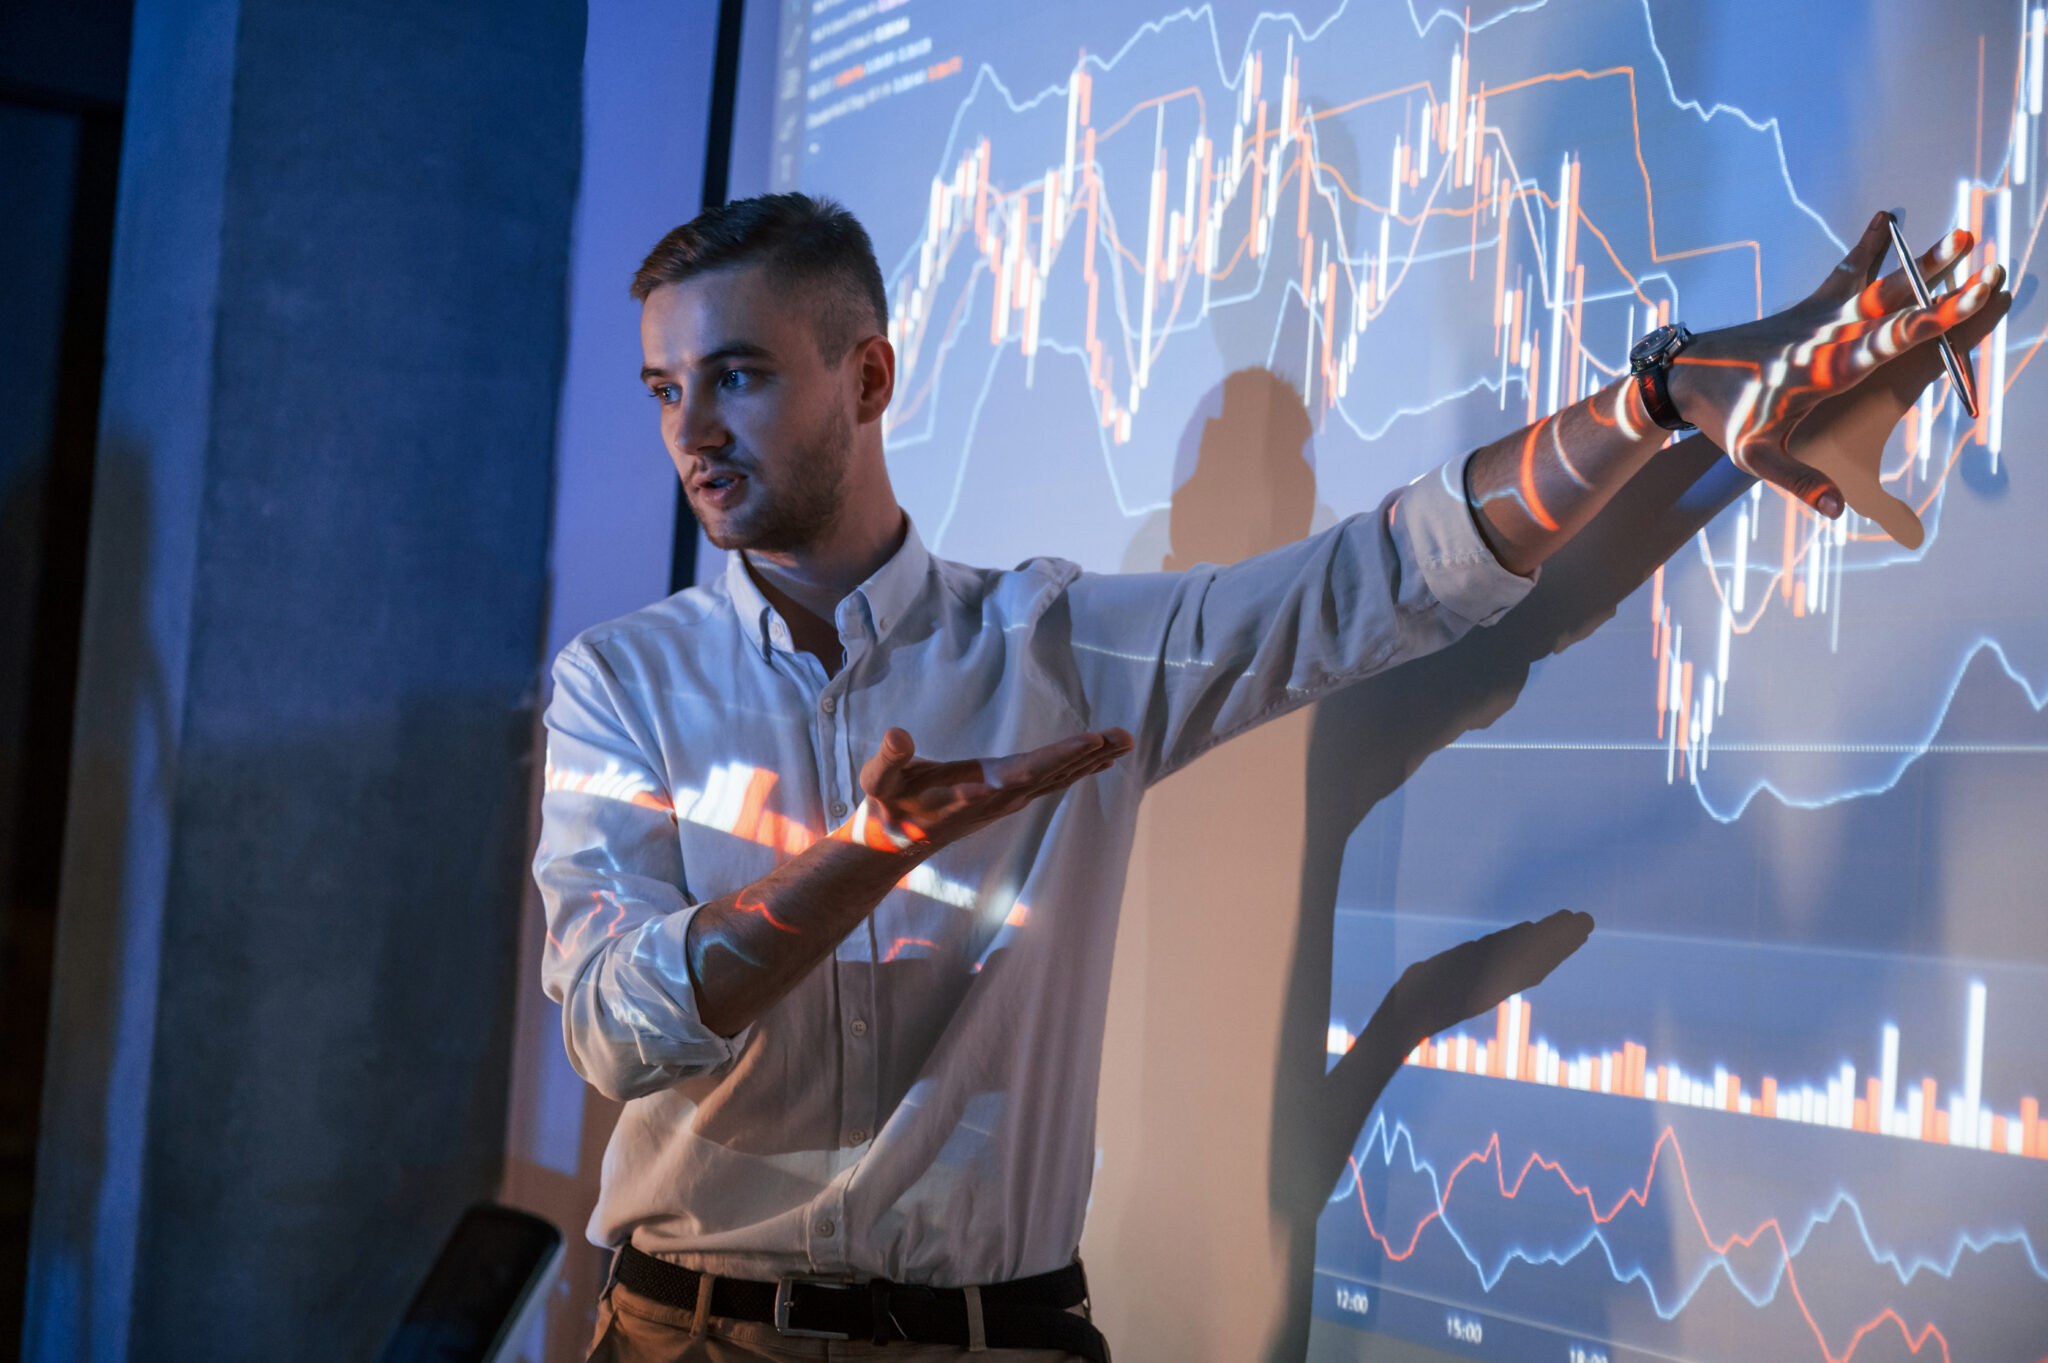 Man is standing near projector and showing graphs and business graphs